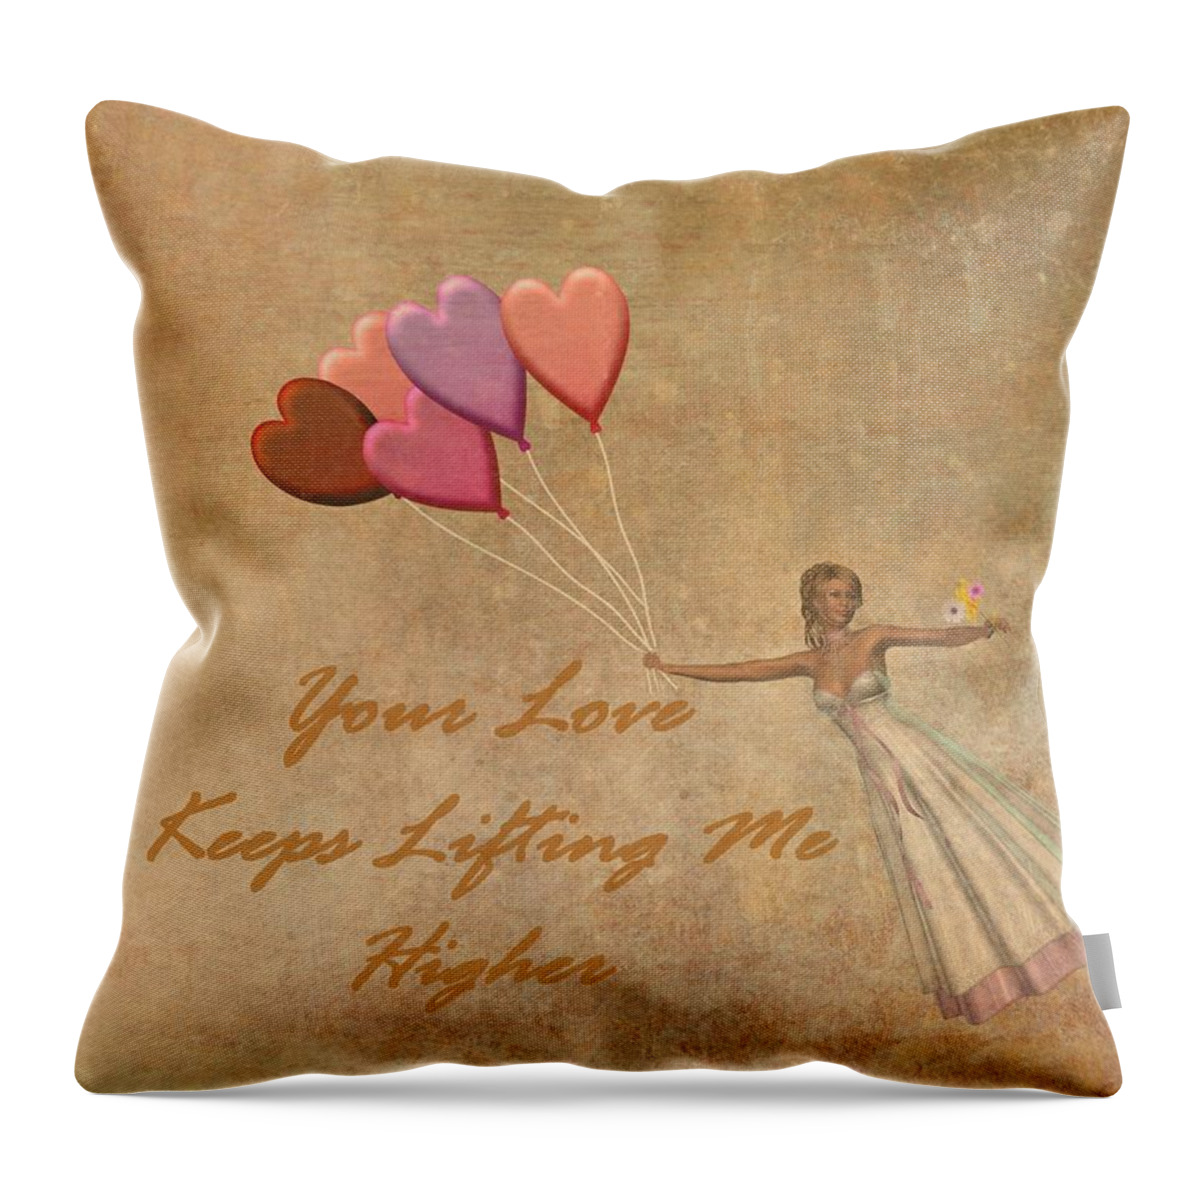 Love Throw Pillow featuring the digital art Your Love Keeps Lifting Me Higher by David Dehner